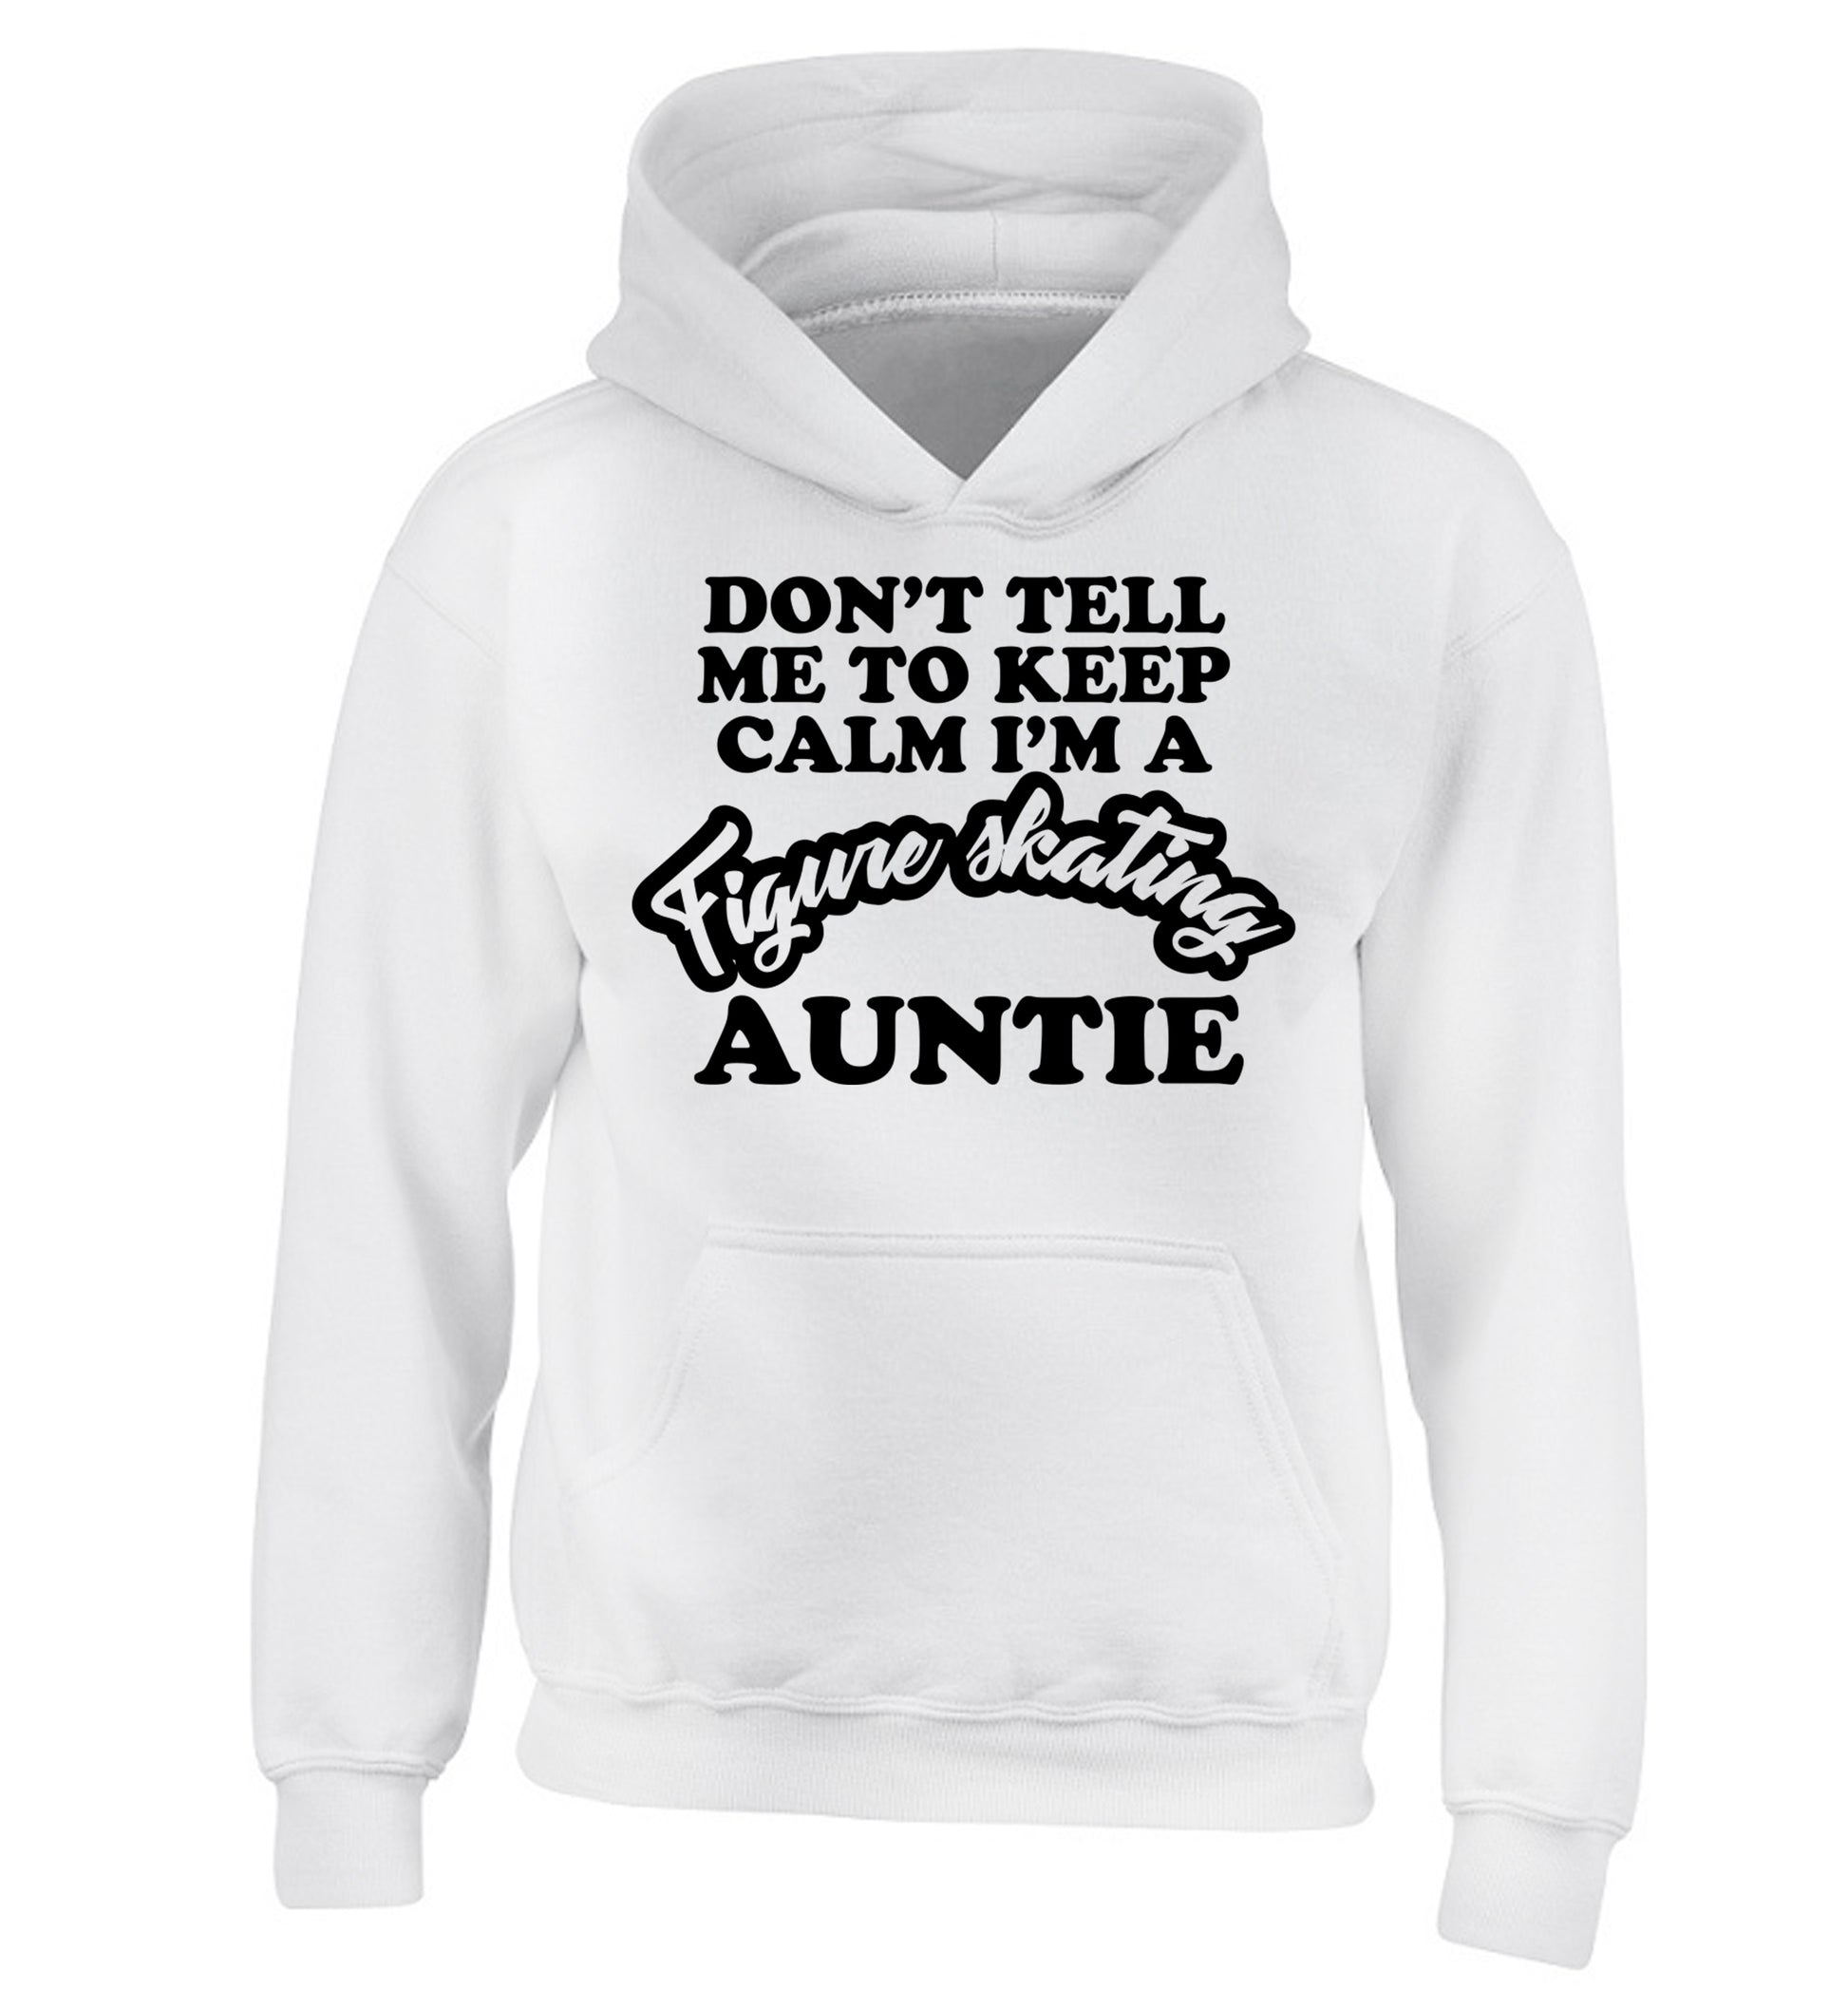 Don't tell me to keep calm I'm a figure skating auntie children's white hoodie 12-14 Years